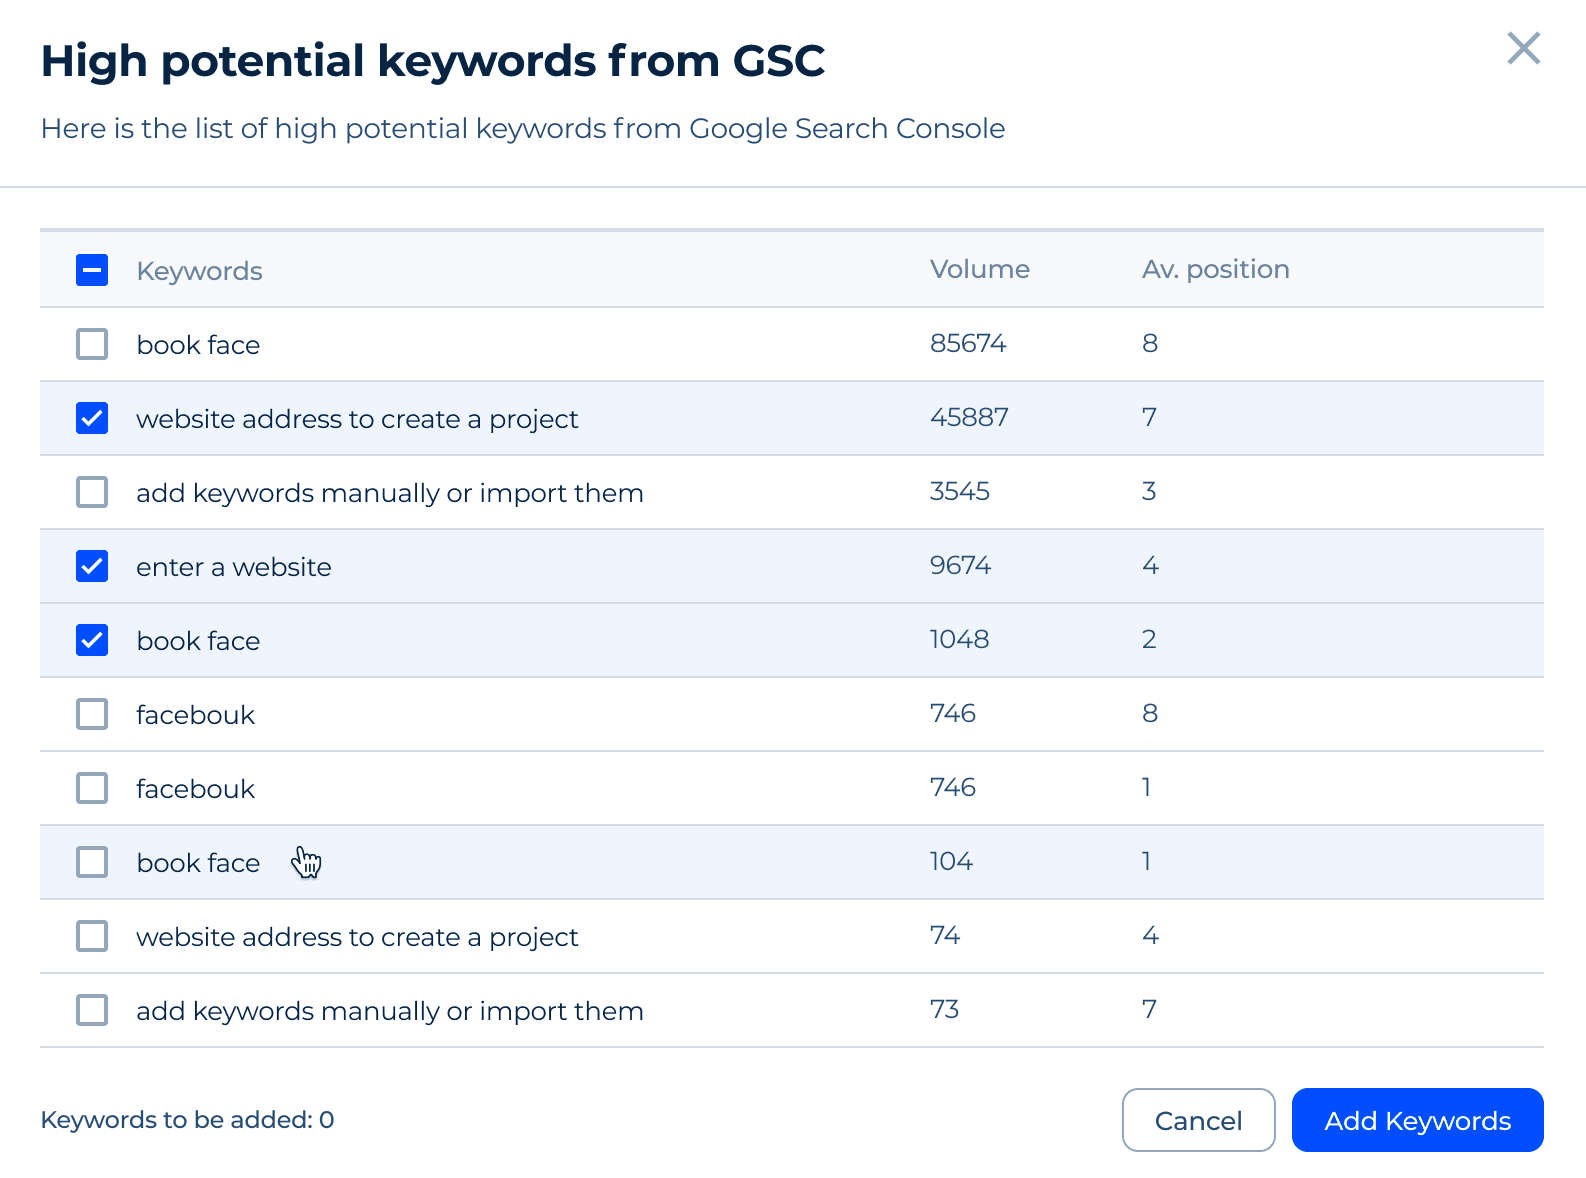 Keywords From GSC